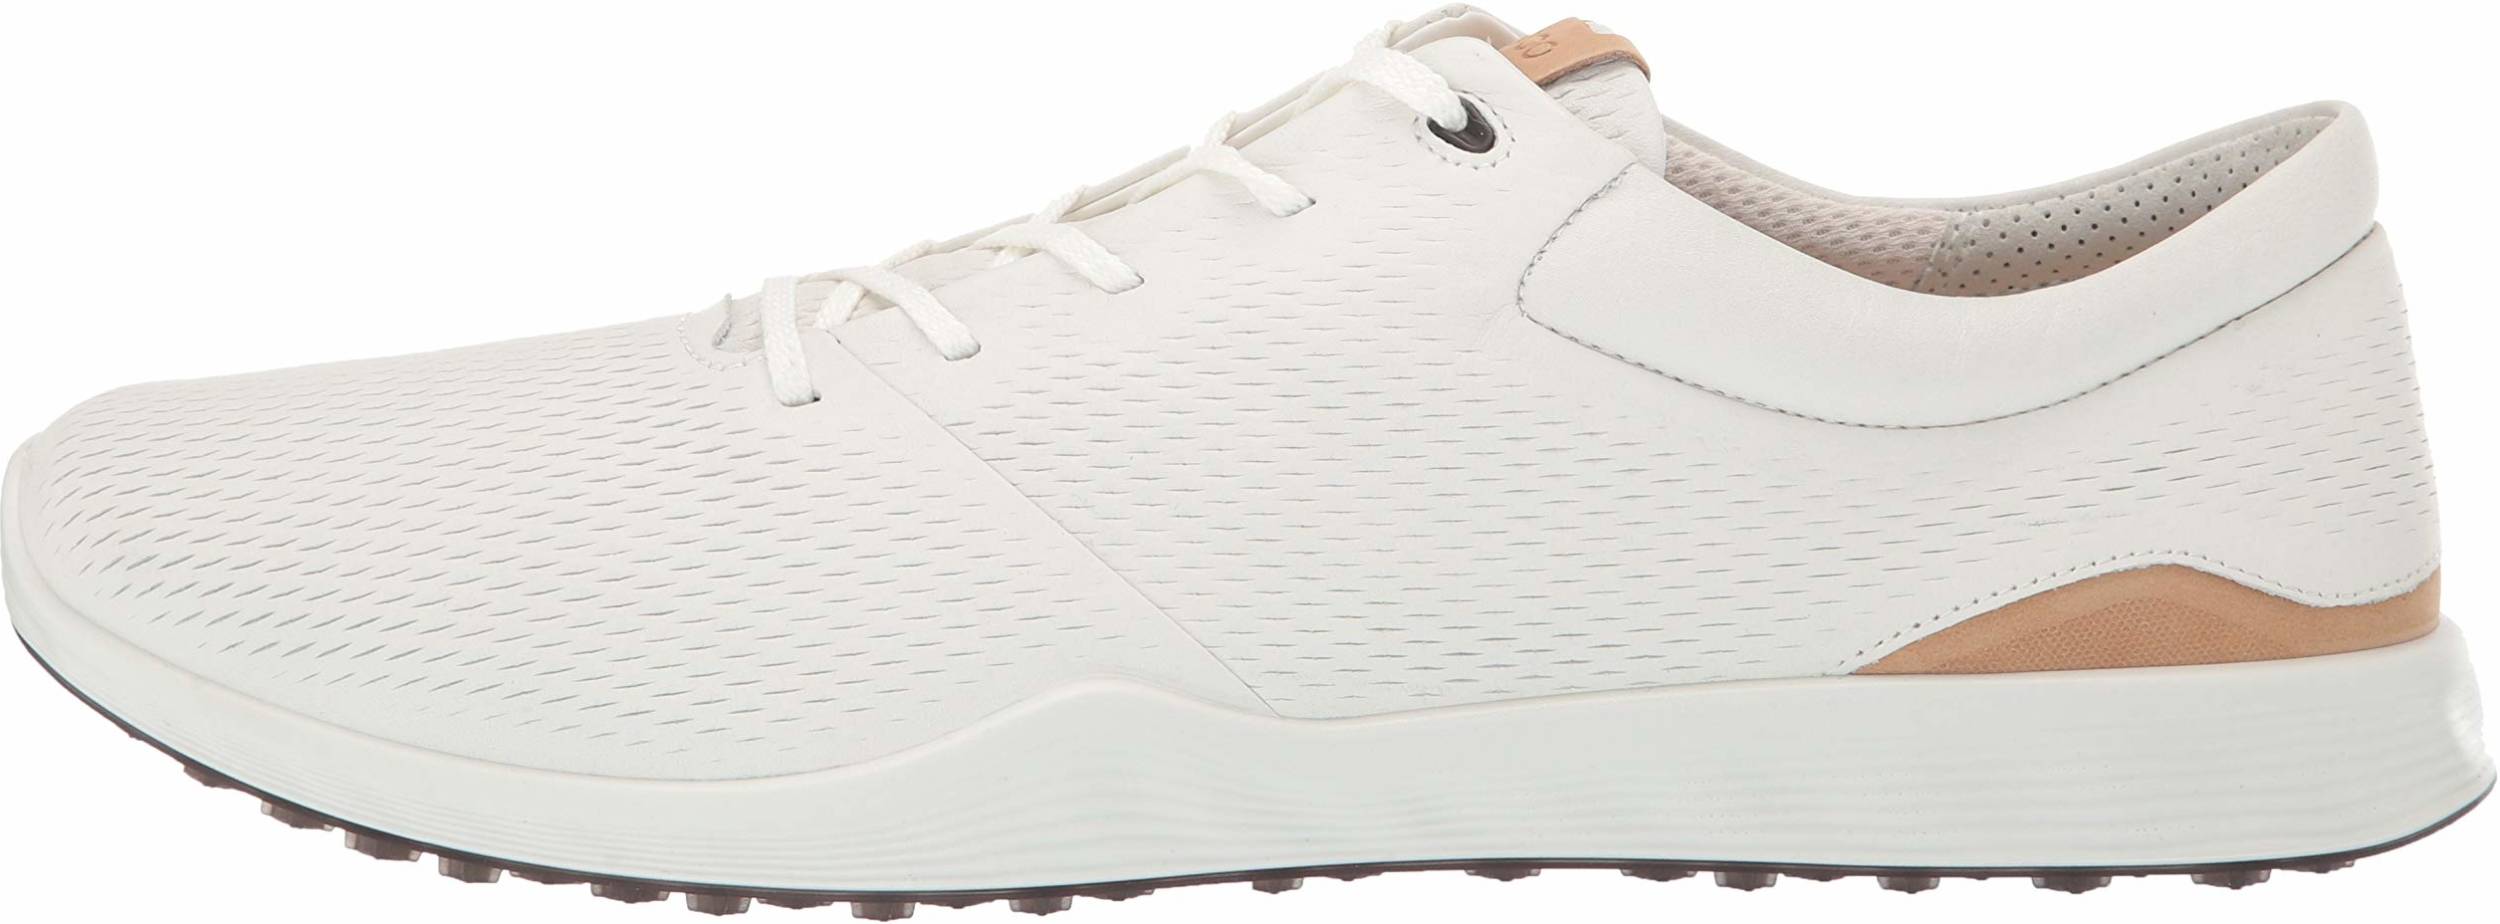 Save 38% on Ecco Golf Shoes (14 Models 